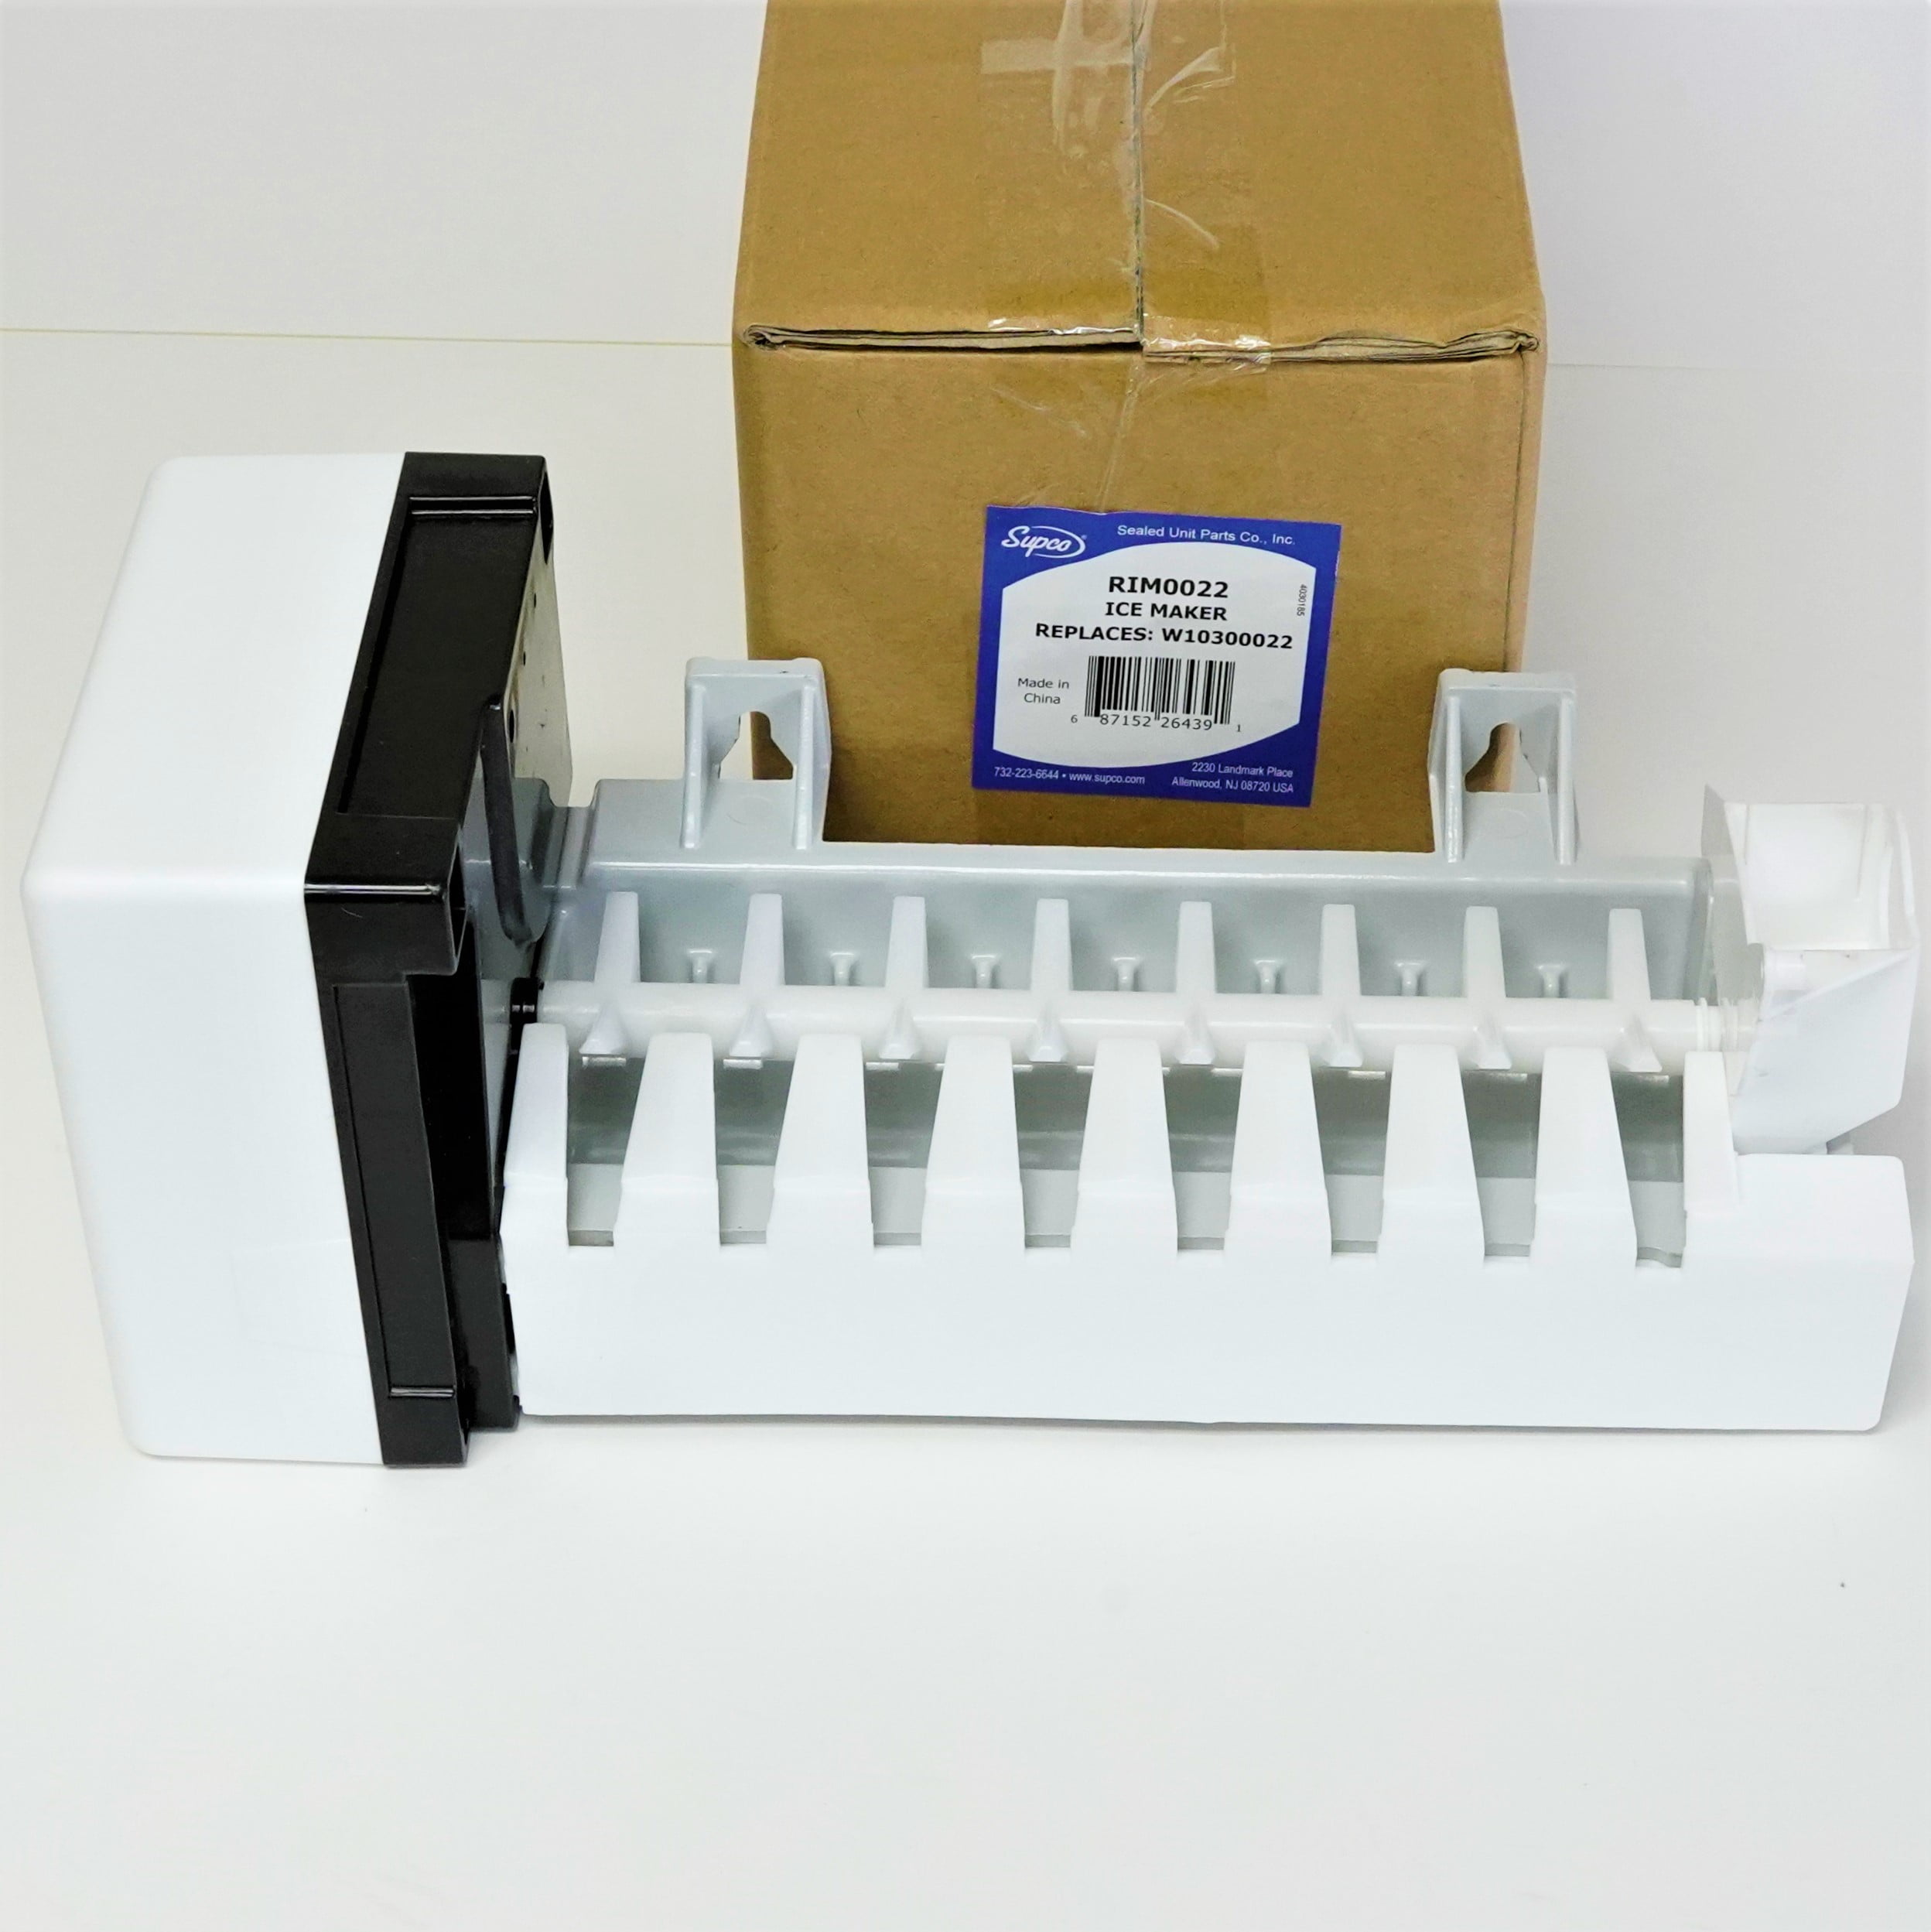 REPLACEMENT ICEMAKER FOR WHIRLPOOL W10300022  WPW10300022 